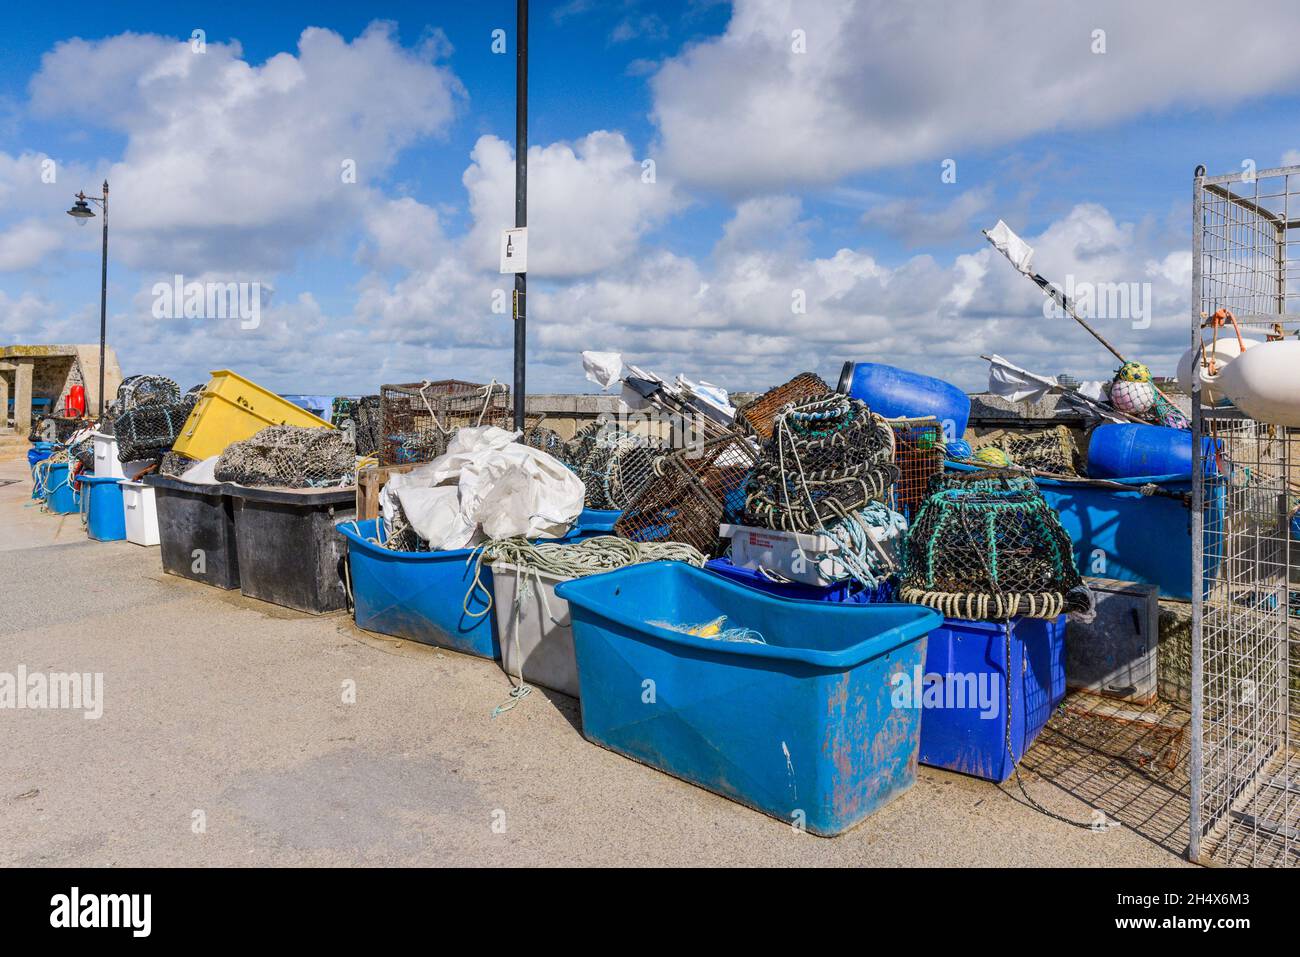 Plastic tubs of rope and fishing net and Lobster Crab and Prawn pots stacked on the quay at the working harbour in Newequay on the North Cornwall coas Stock Photo